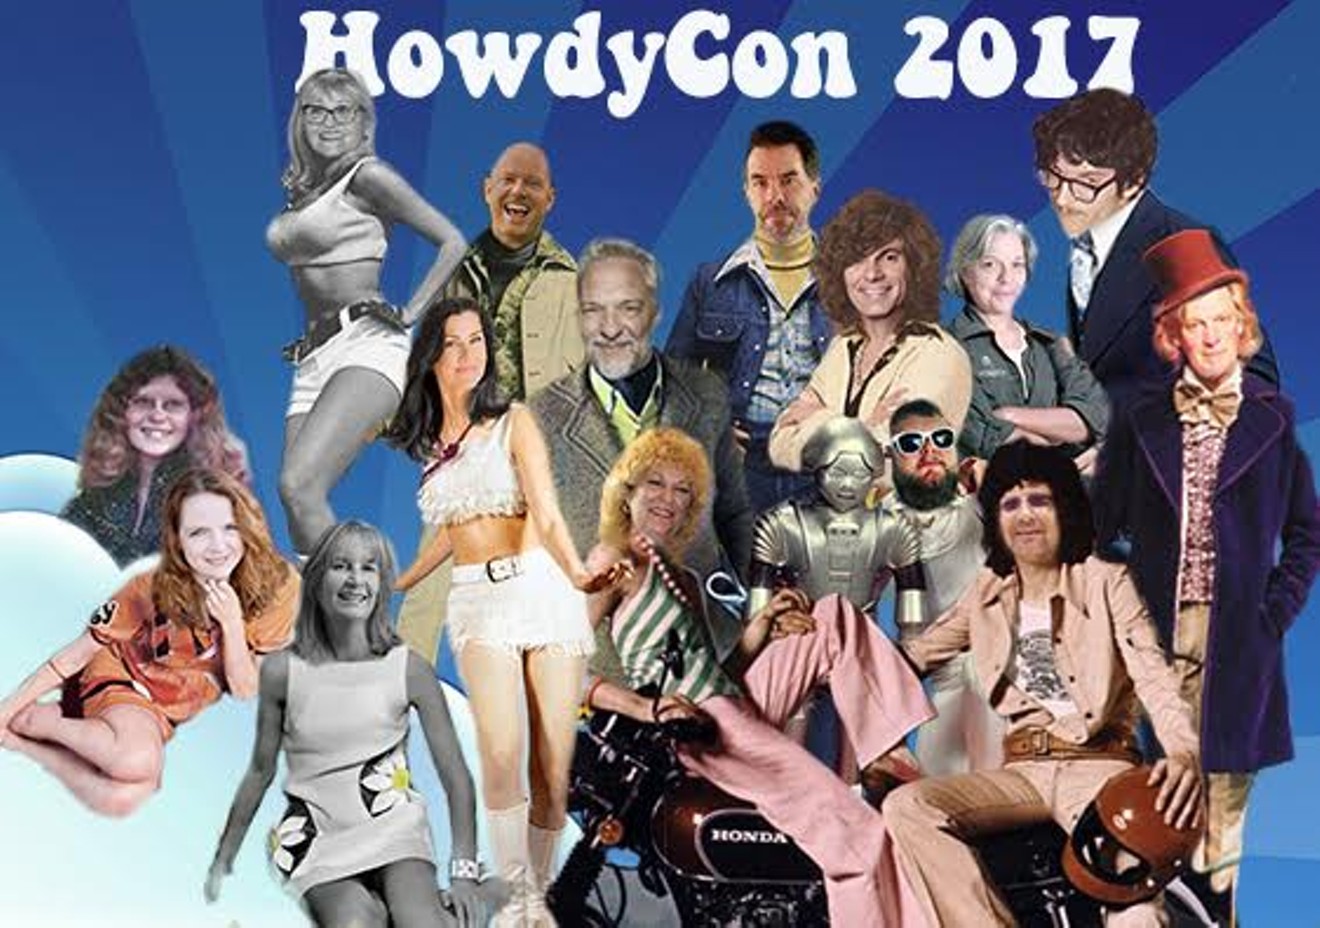 HowdyCon 2017 was a meet-up of journalists, activists and hangers-on, several of whom were featured in photoshopped, 1970s-themed posters.